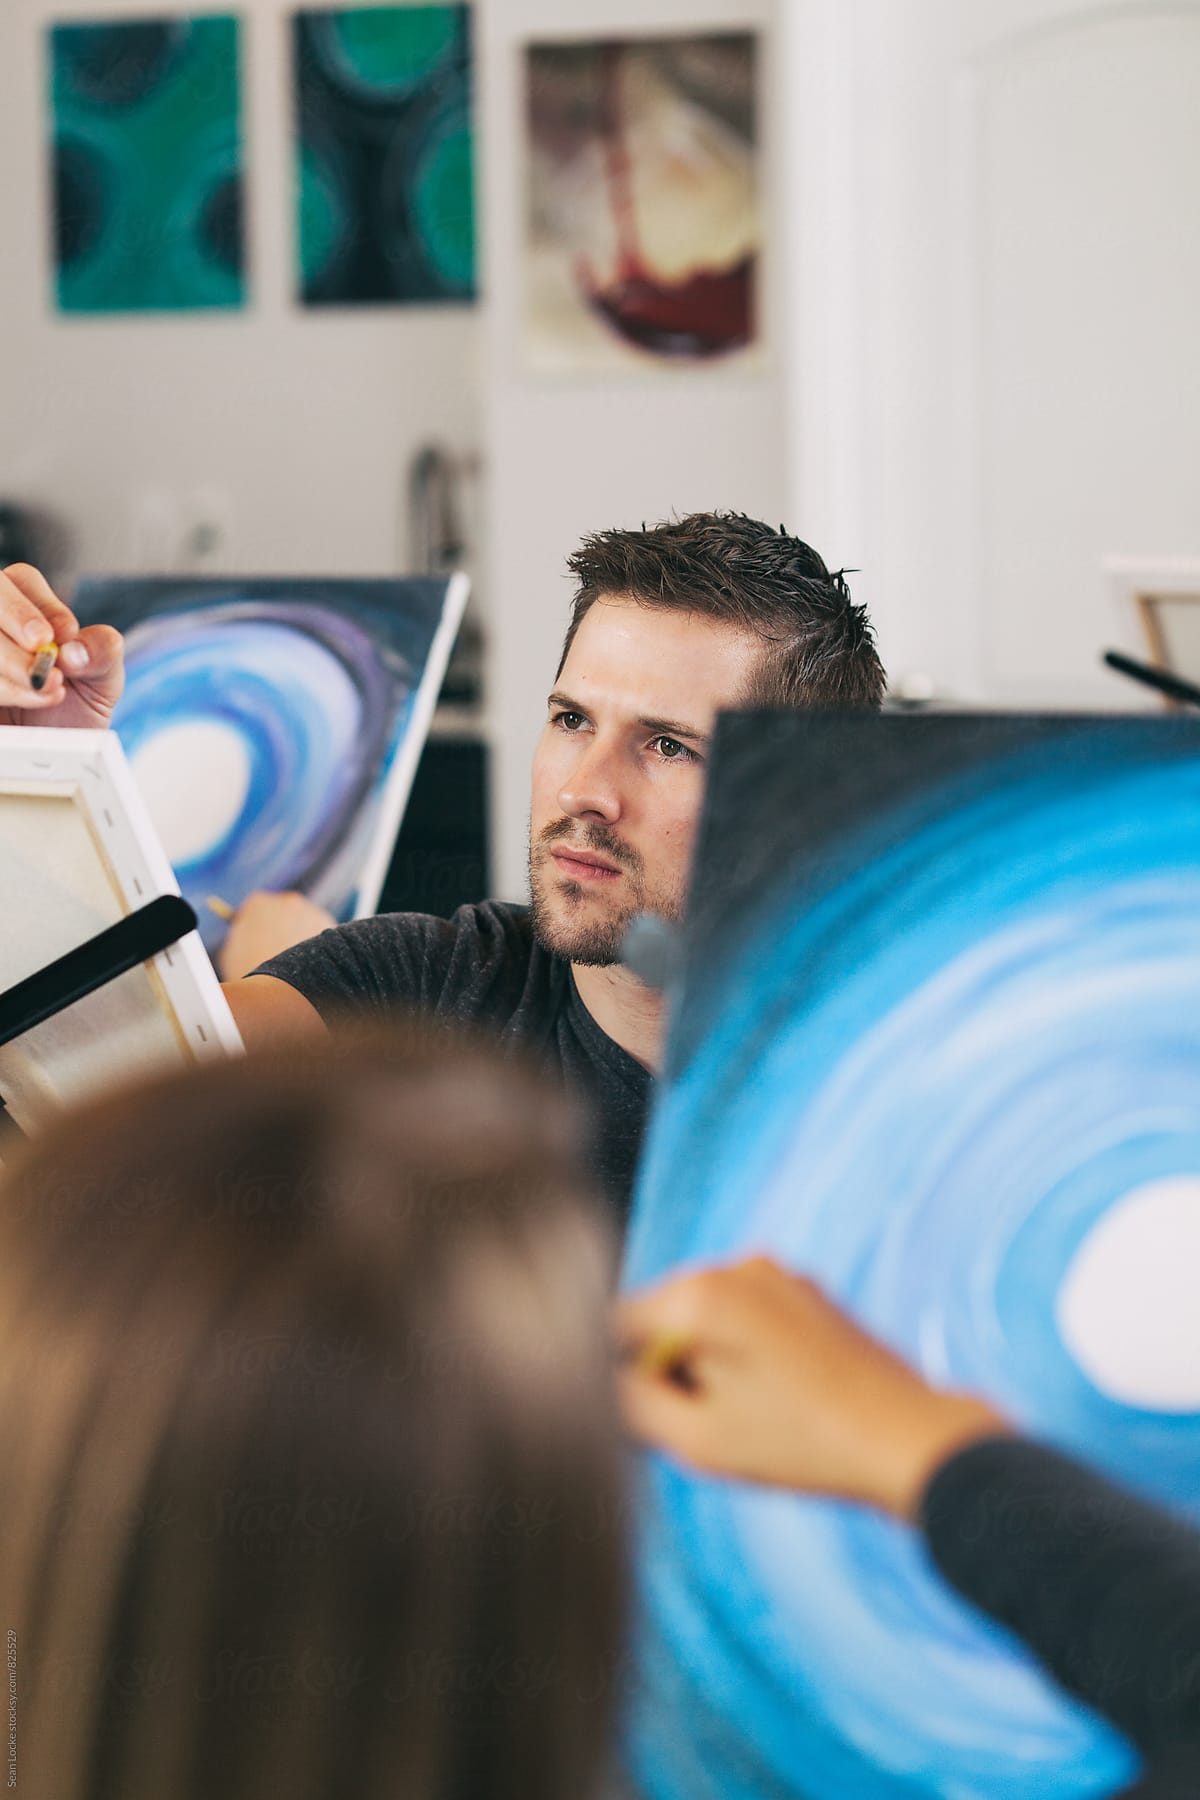 Painting: Man In Group Creating Art During Class